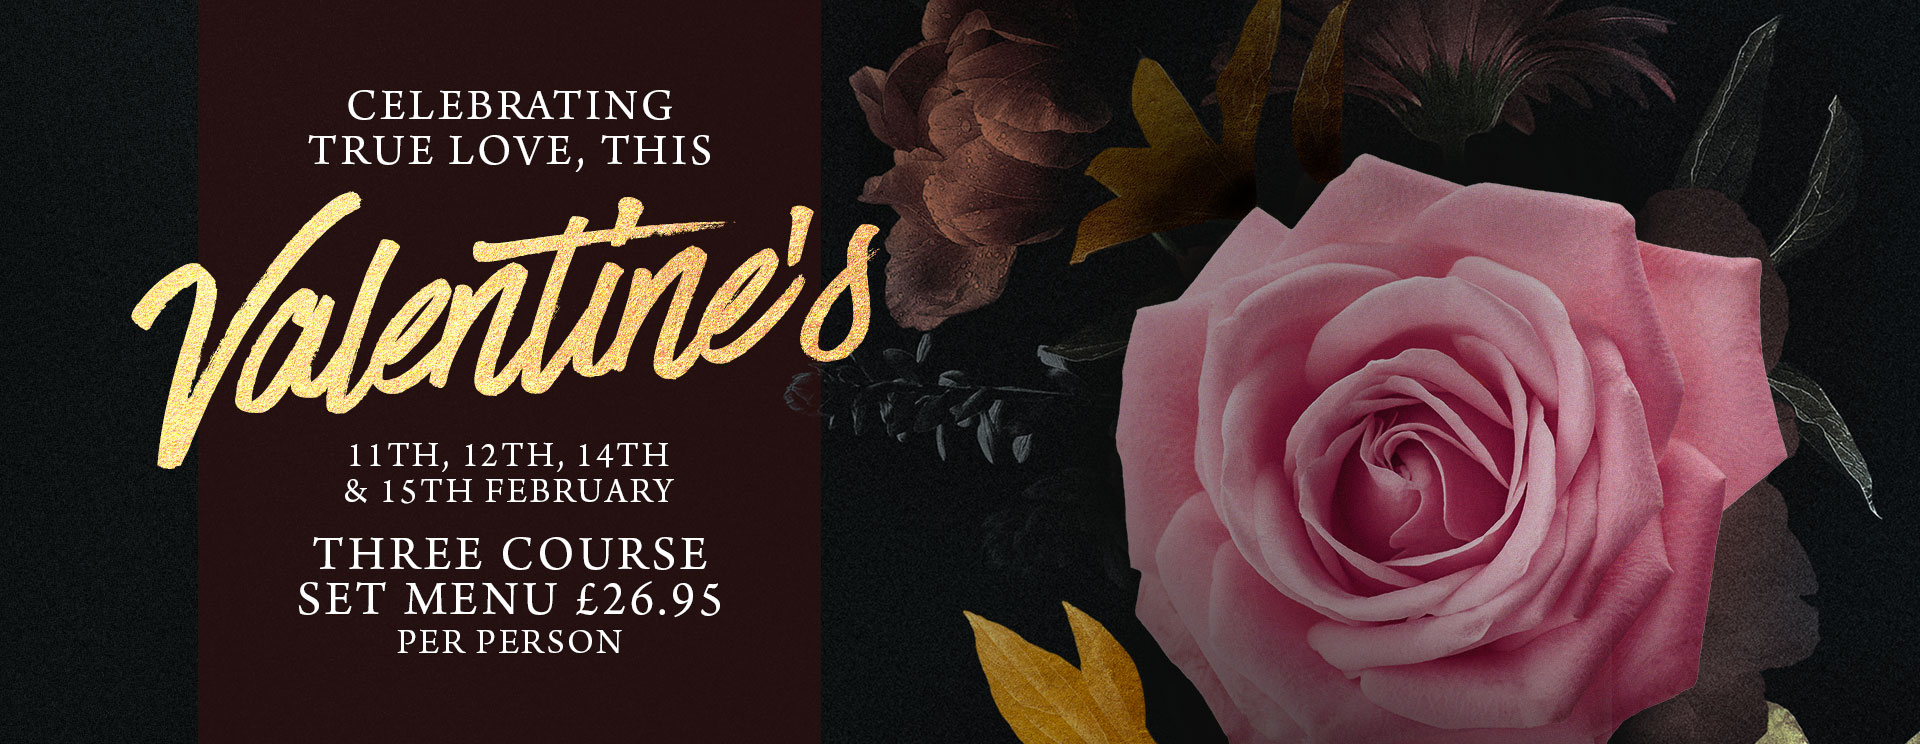 Valentines at The Kings Arms